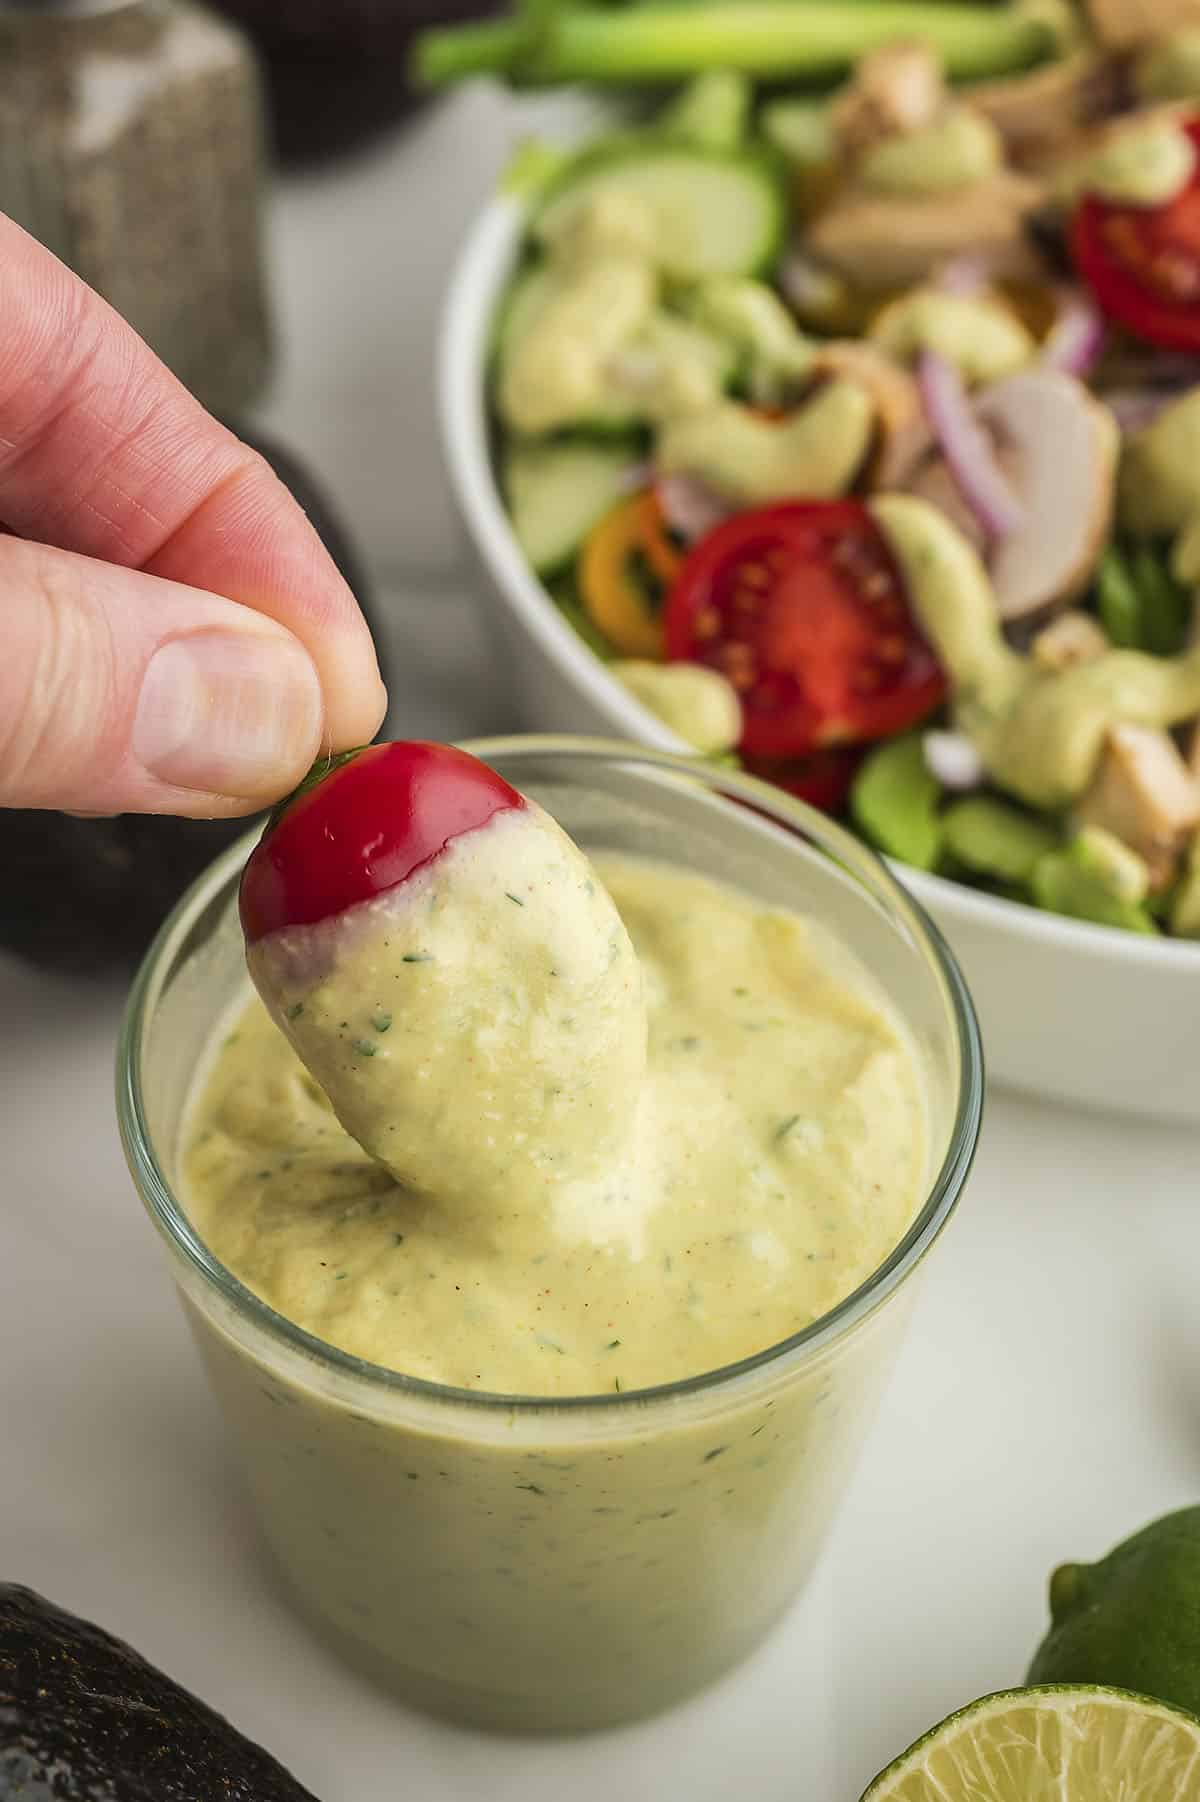 Mini sweet pepper being dunked in avocado salad dressing.